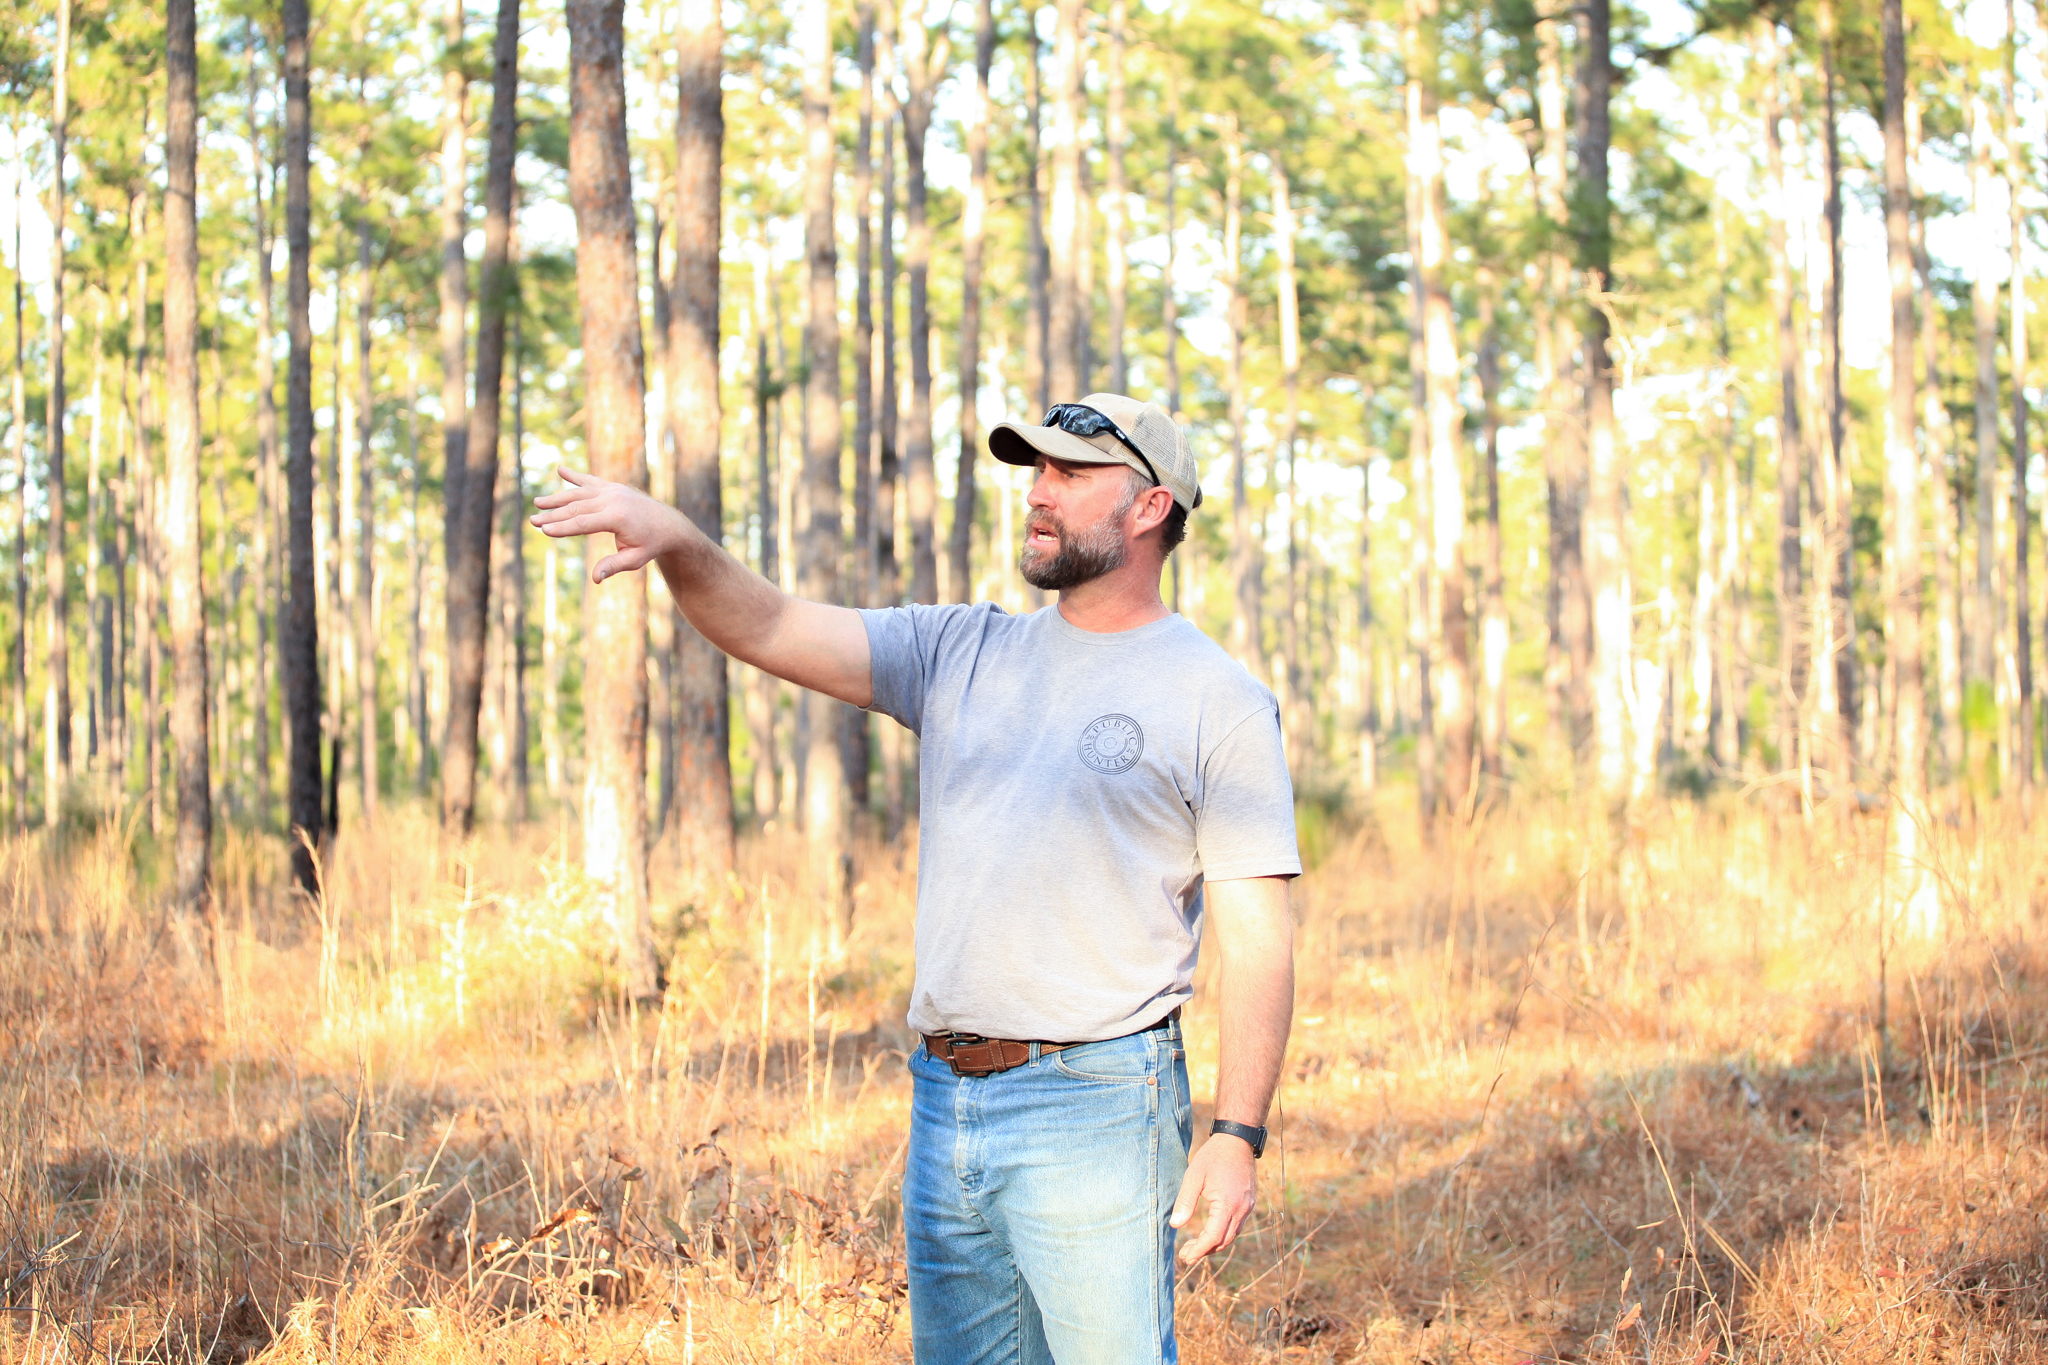 East Texas Forest Preserves Manager Shawn Benedict stands amongst a longleaf pine stand, animatedly giving a talk on a tour of the Sandyland Sanctuary.